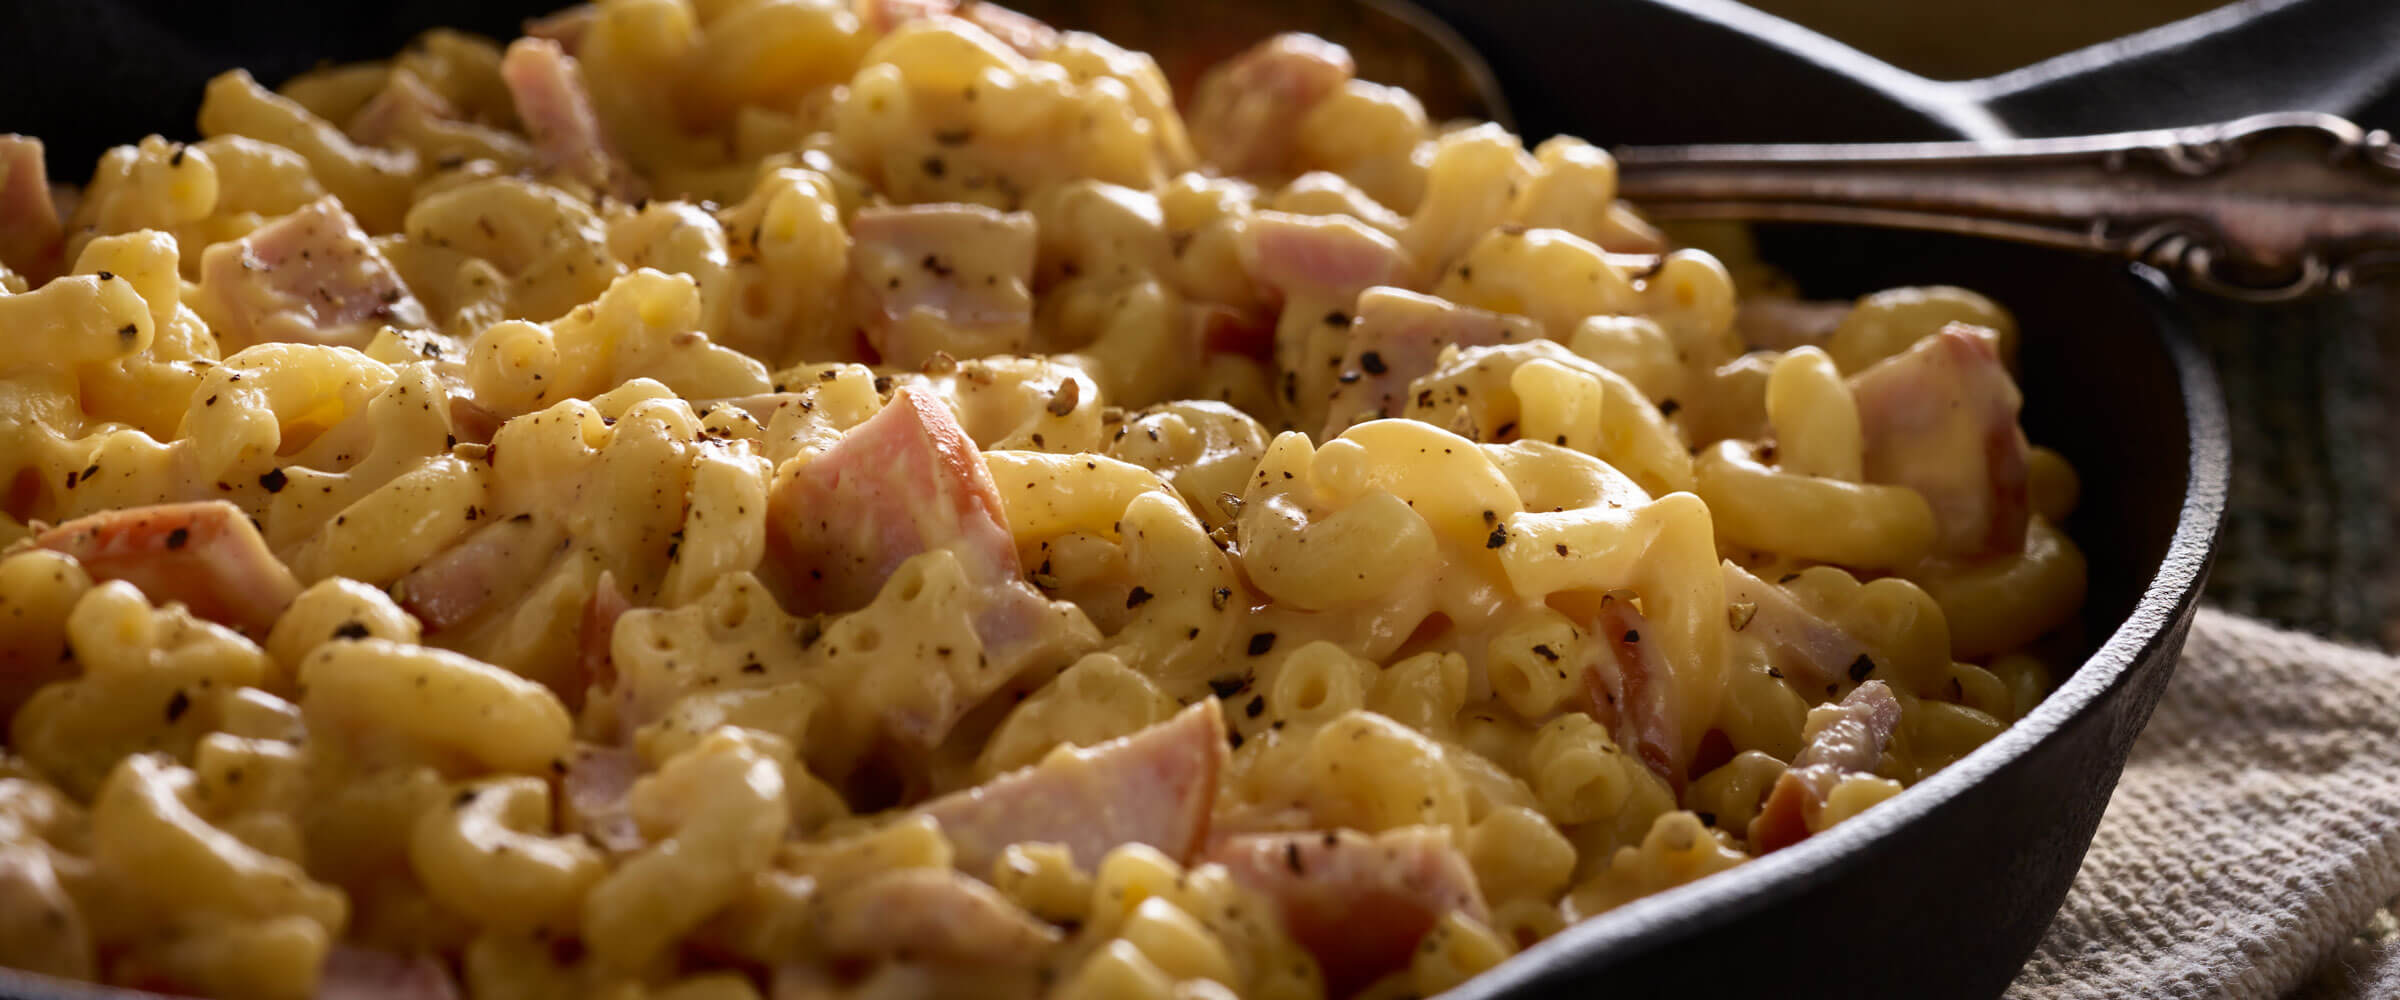 Skillet Canadian Bacon Macaroni and Cheese with serving spoon